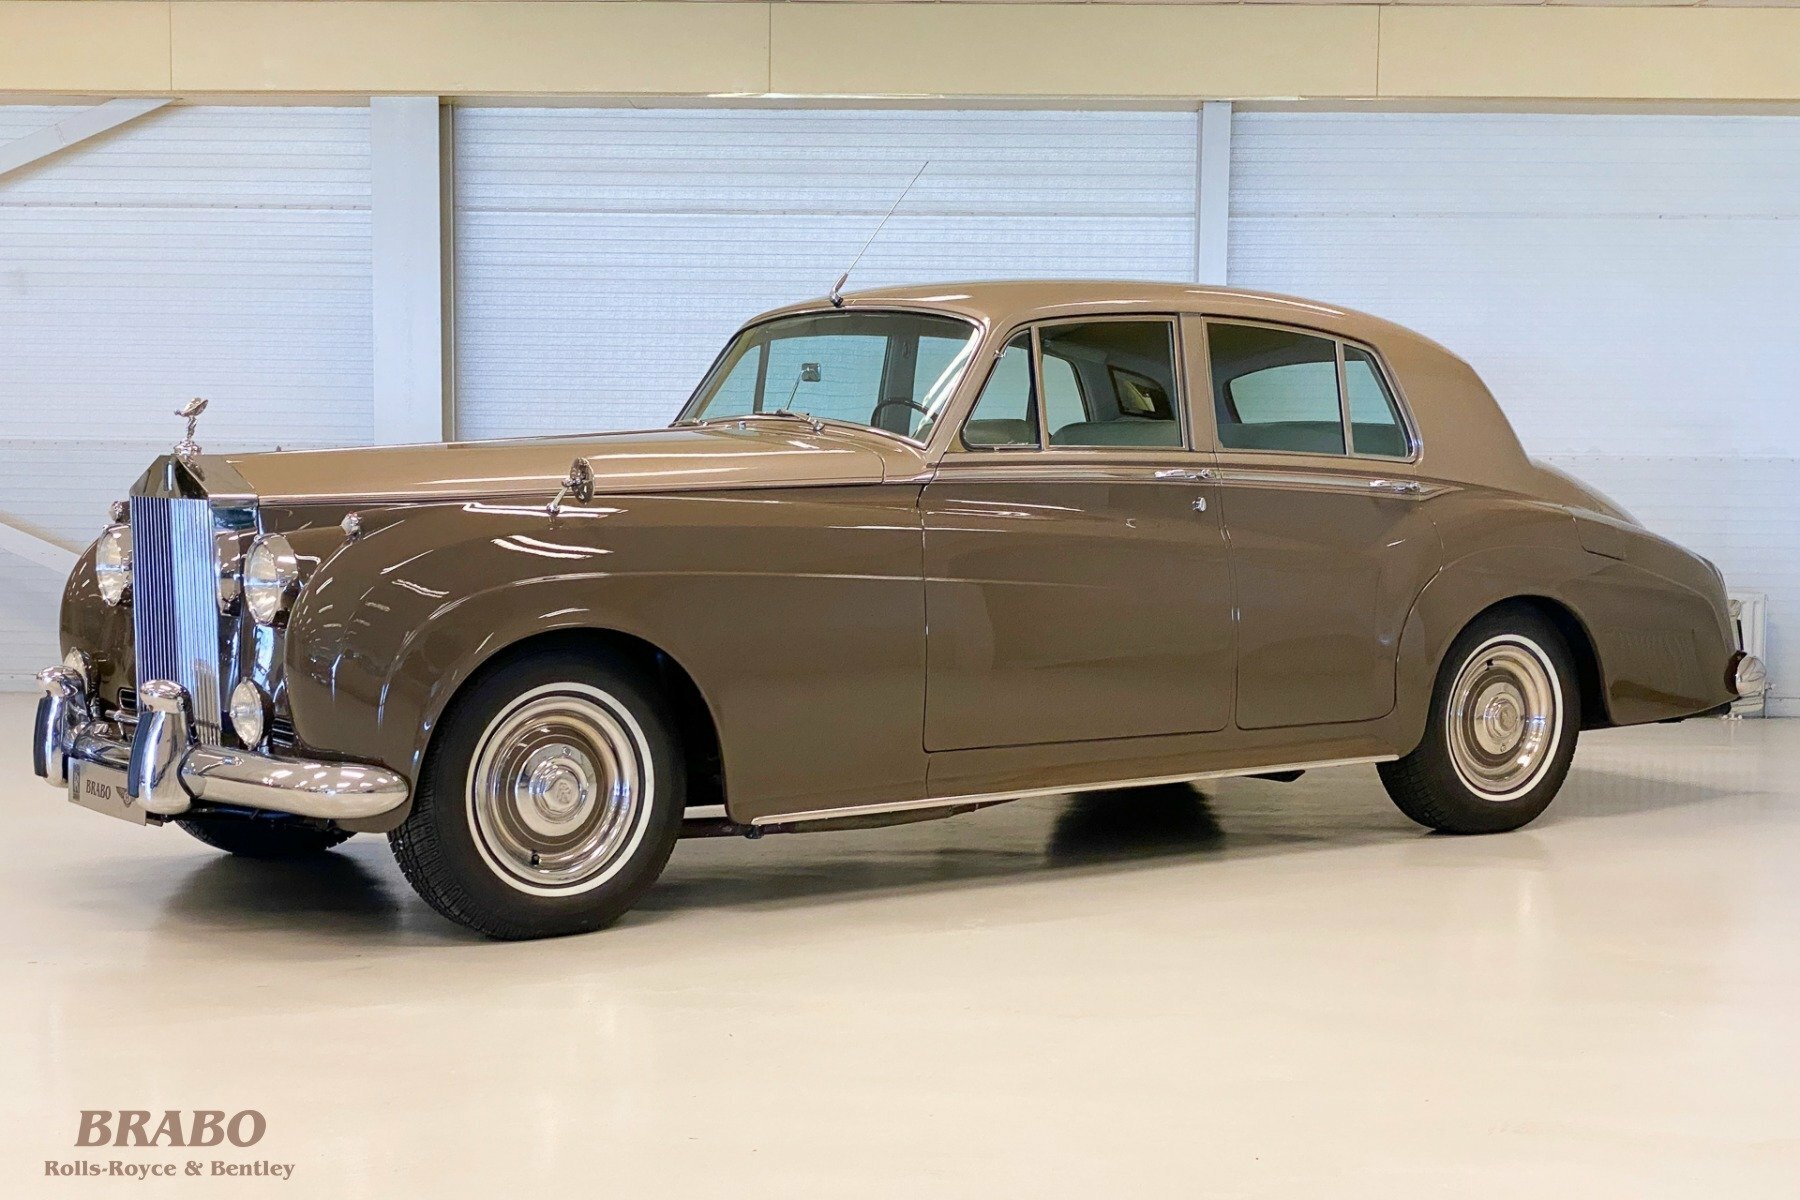 RR calls the upper color Walnut Metallic and the lower color Silver Sand  Metallic  Rolls royce silver shadow The iron lady Rolls royce